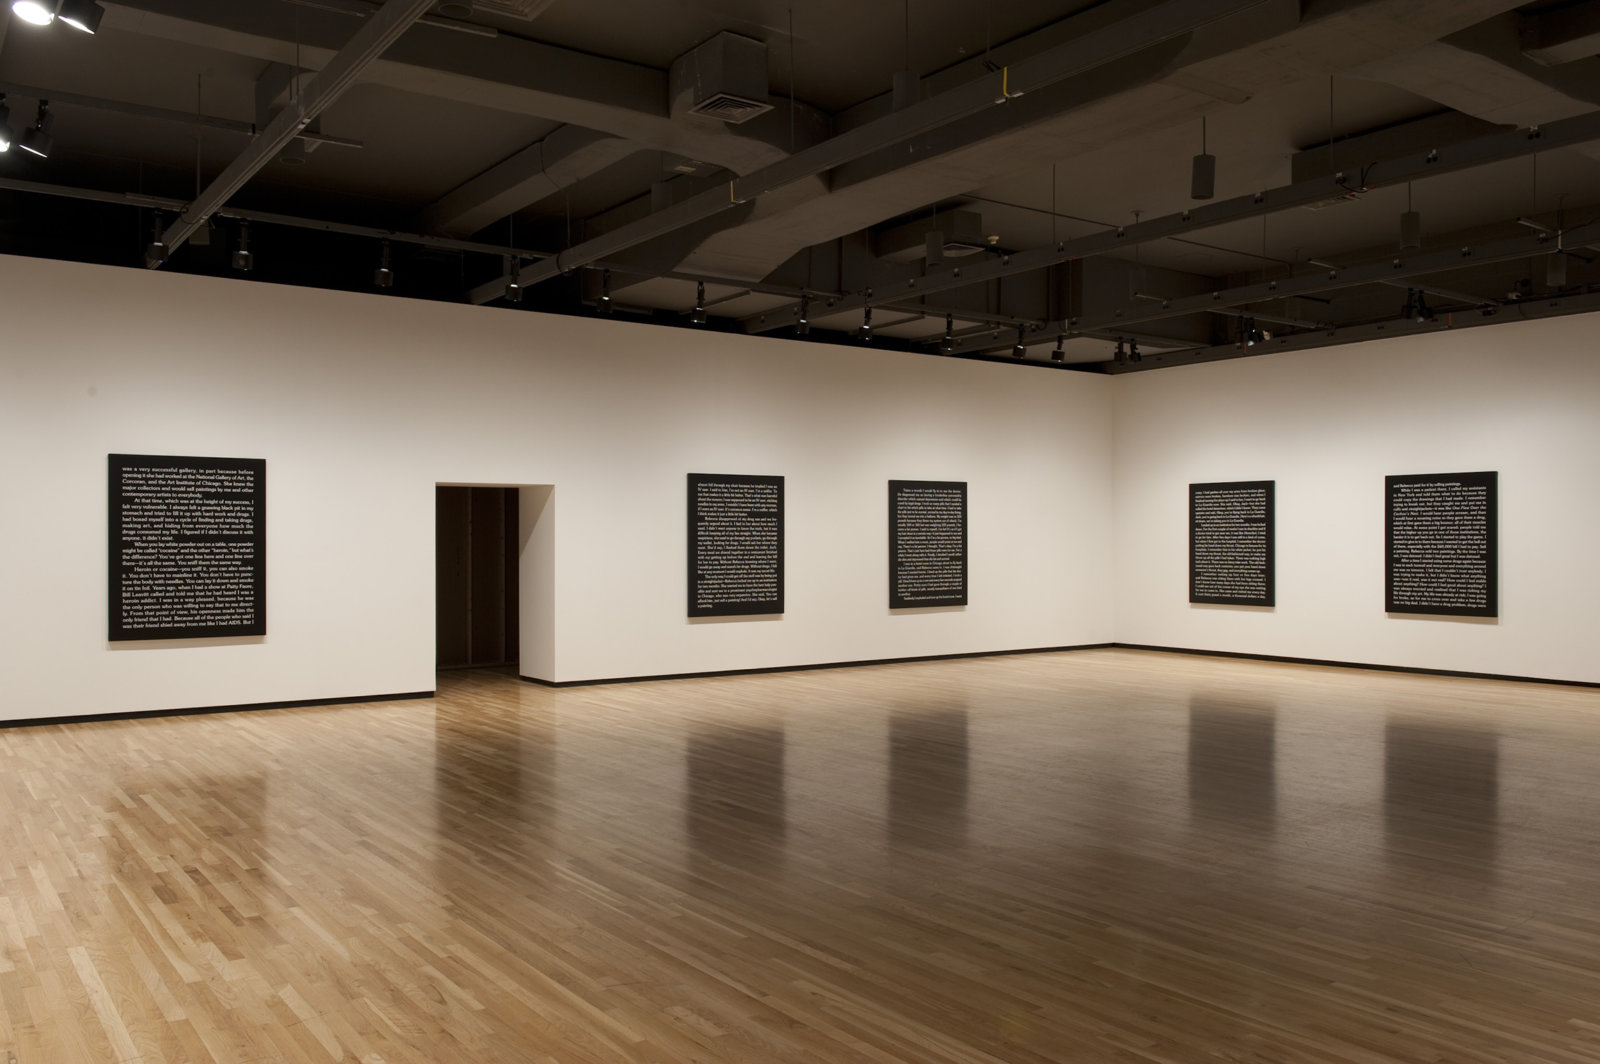 Ron Terada, Jack, 2010, acrylic on canvas, each 60 x 48 in. (152 x 122 cm). Installation view, Who I Think I Am, Walter Phillips Gallery, Banff, AB, 2010